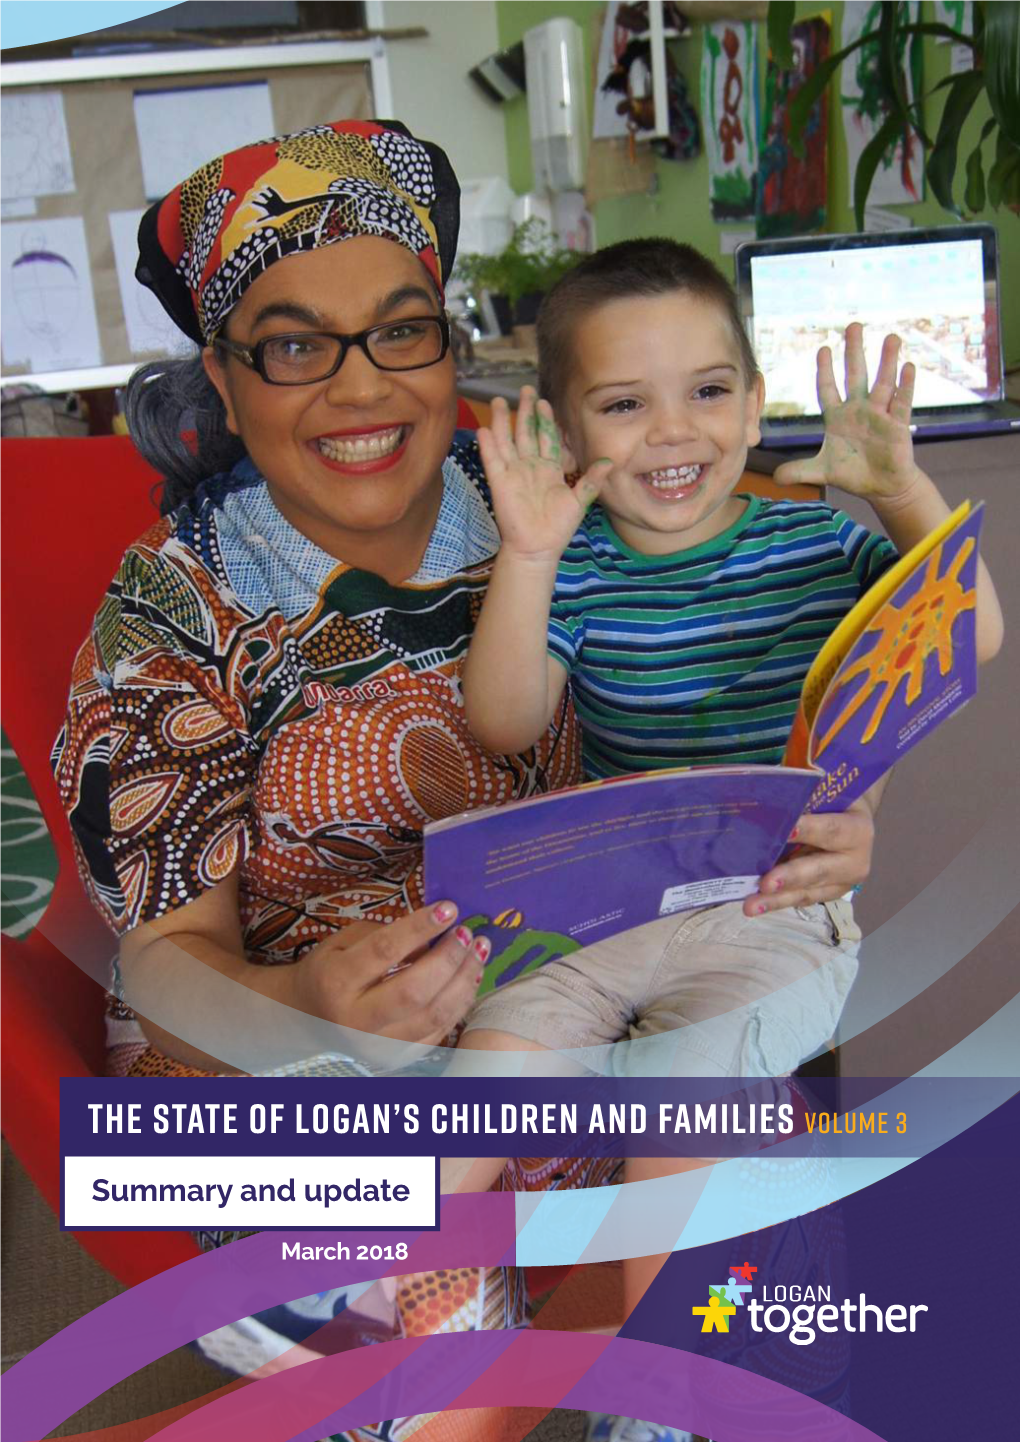 The State of Logan's Children and Families Volume 3